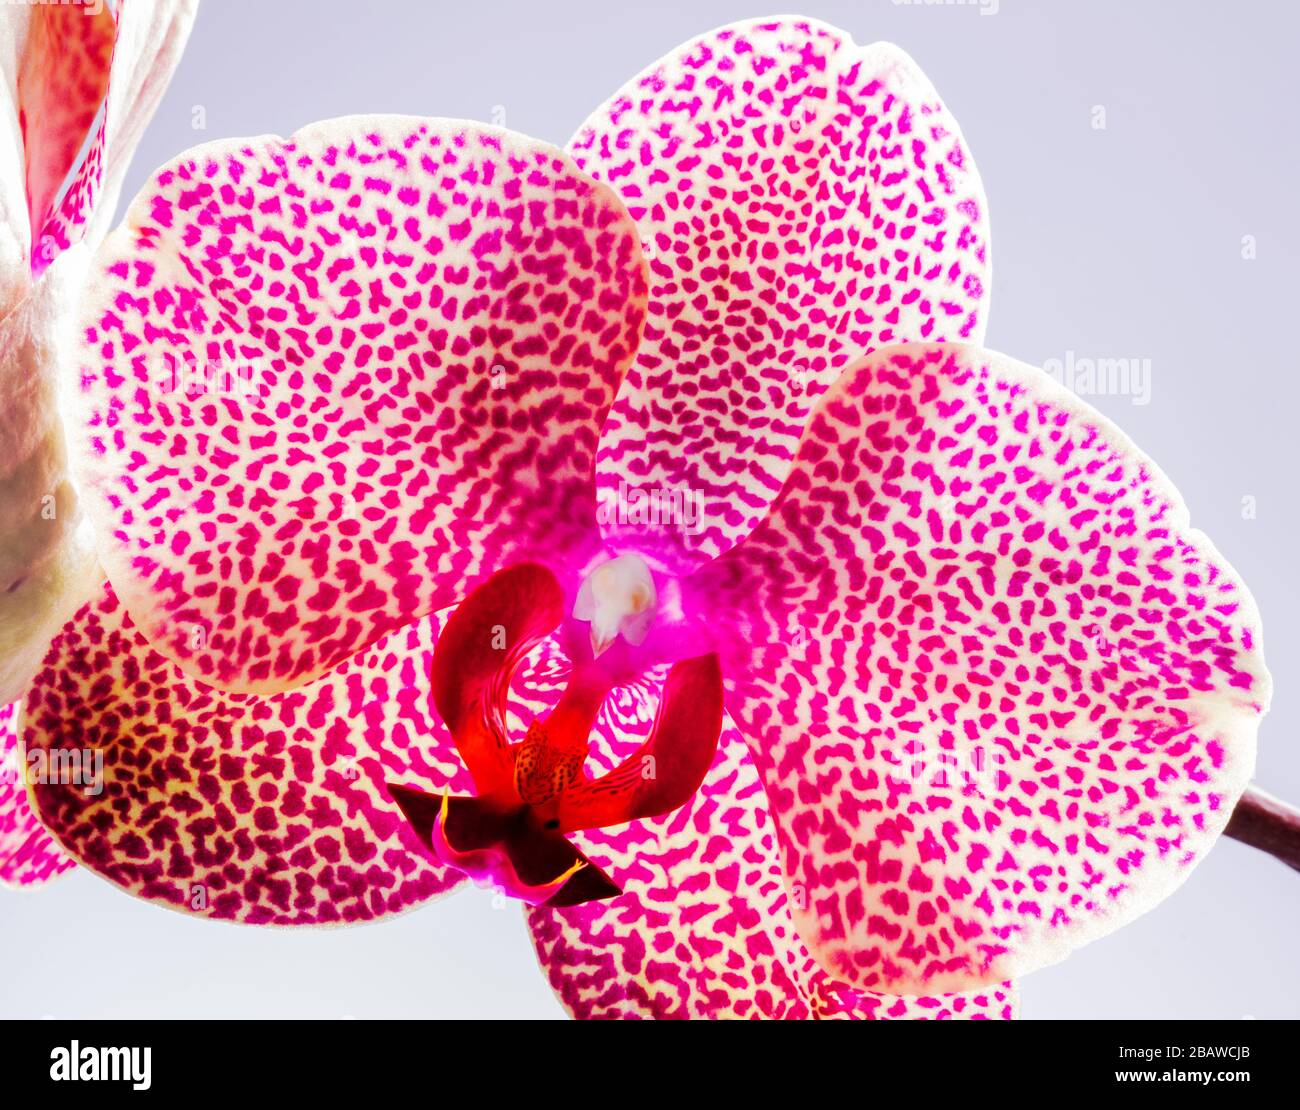 Close-up of blooming Orchid flower; Orchidaceae; one of the two largest family of flowering plants Stock Photo